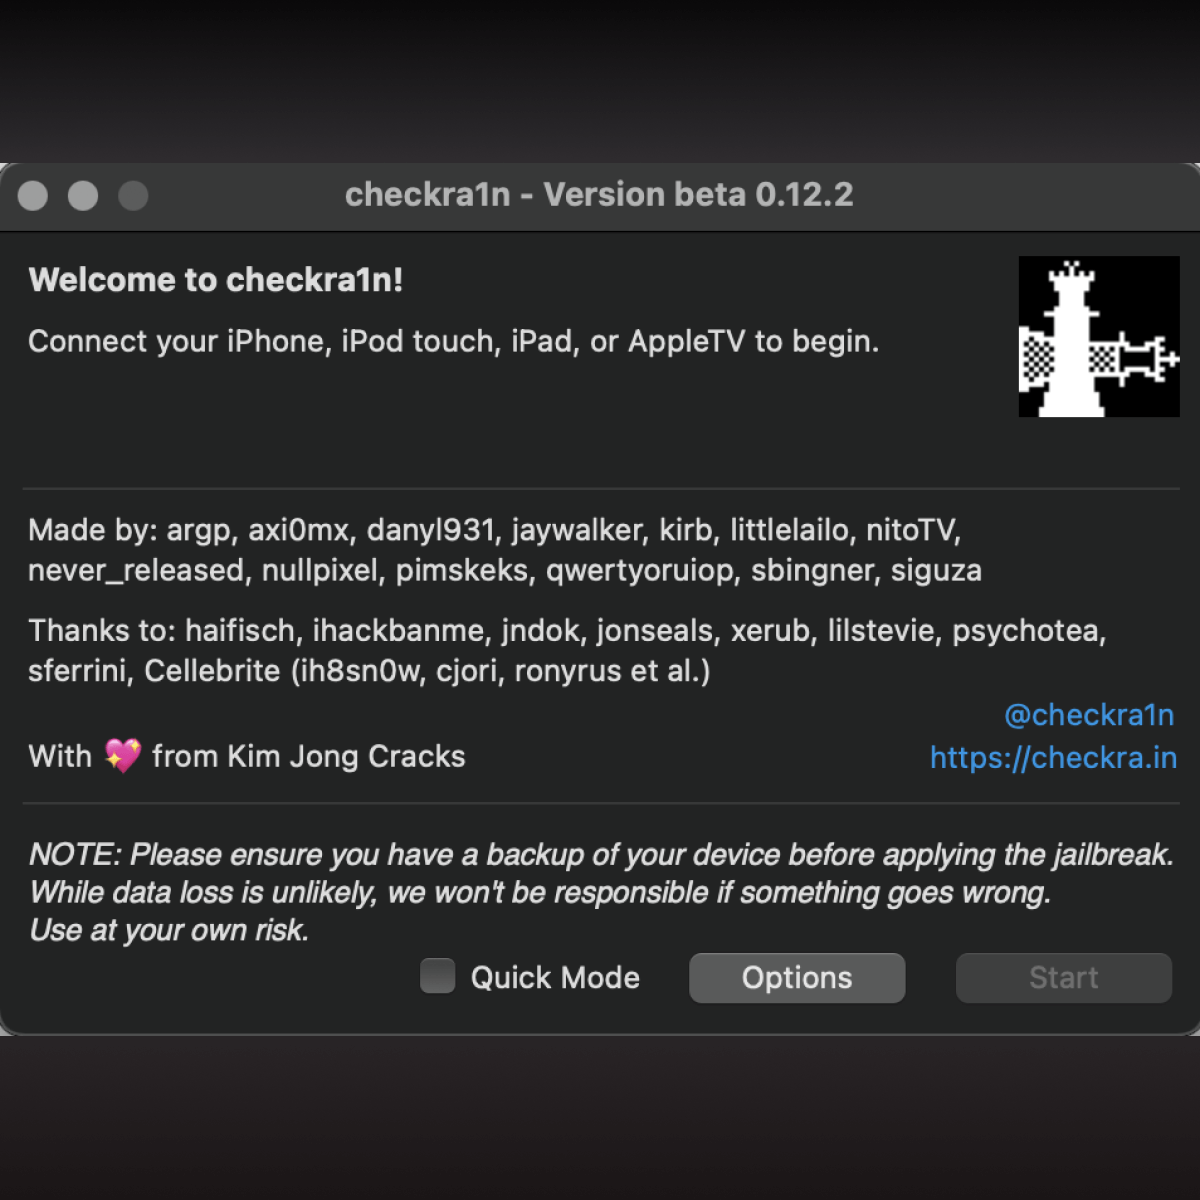 Step By Step Guide to jailbreak iOS 14.6 using Checkra1n 